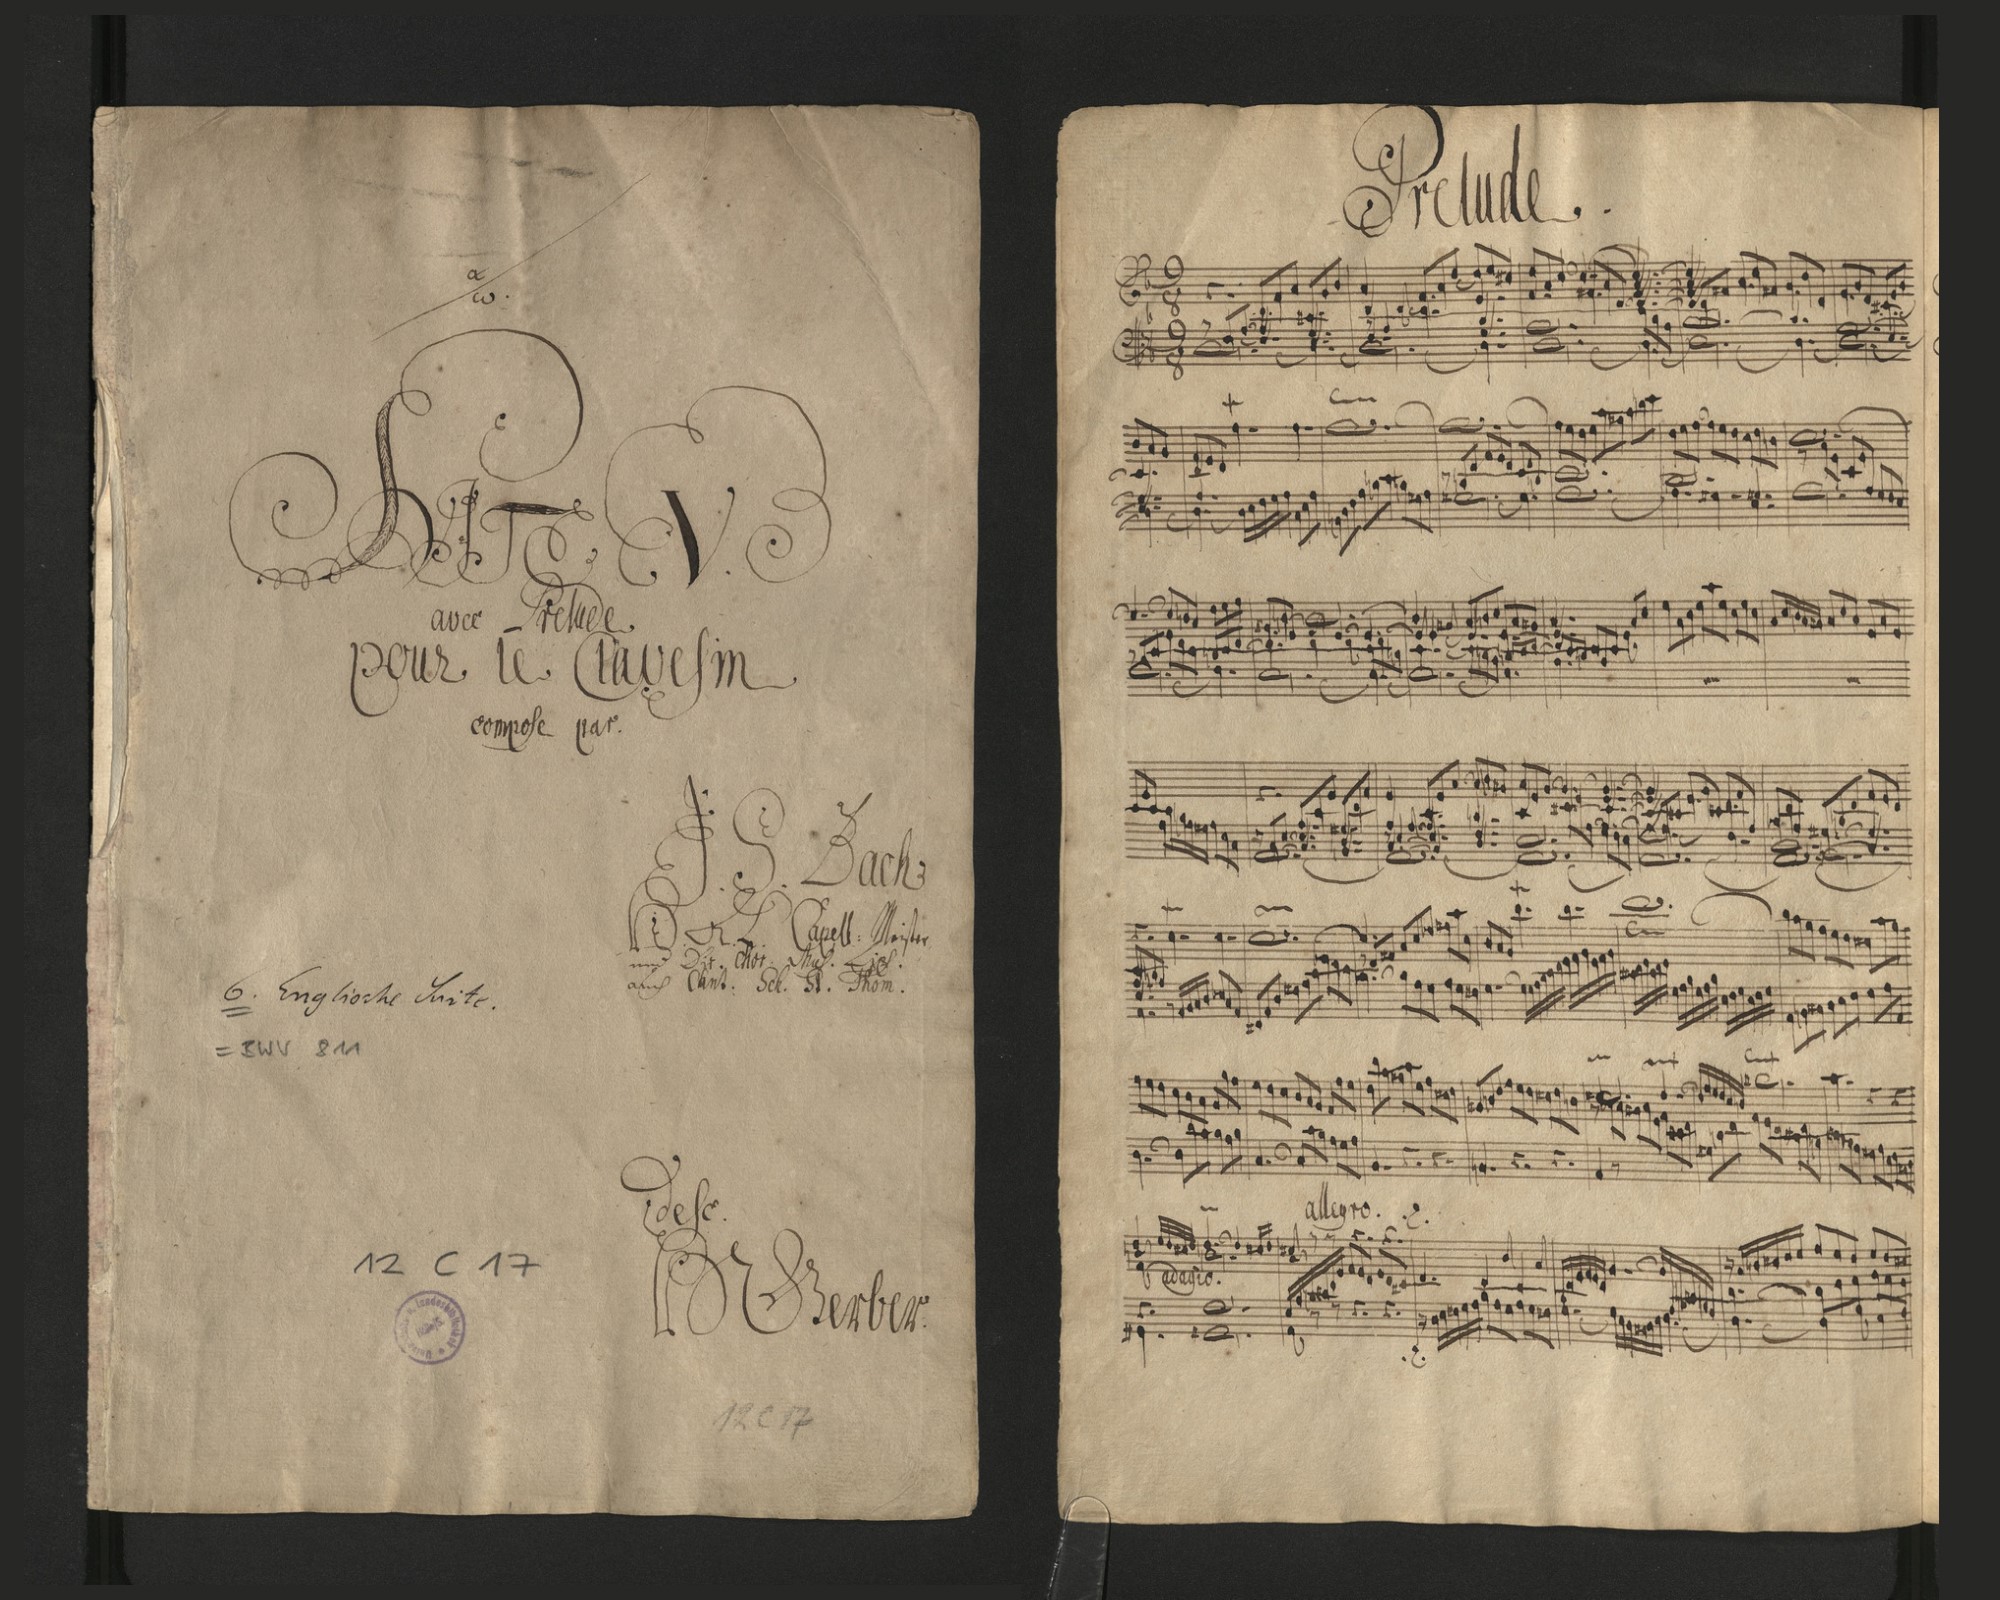 Title page and first page of music of the English Suite in D minor, BWV 811